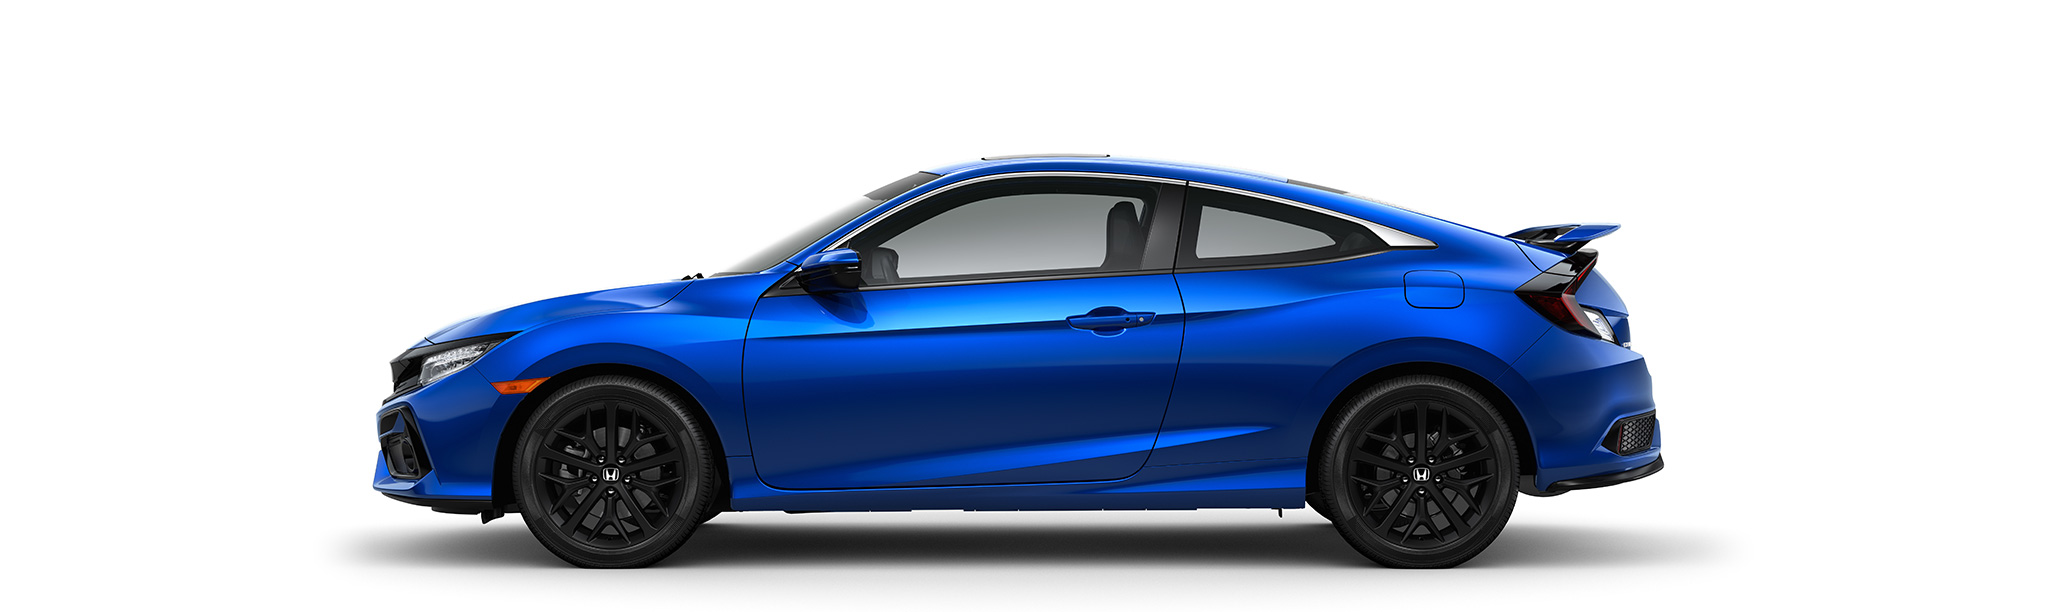 civic-coupe-ext-pano-bg-tablet